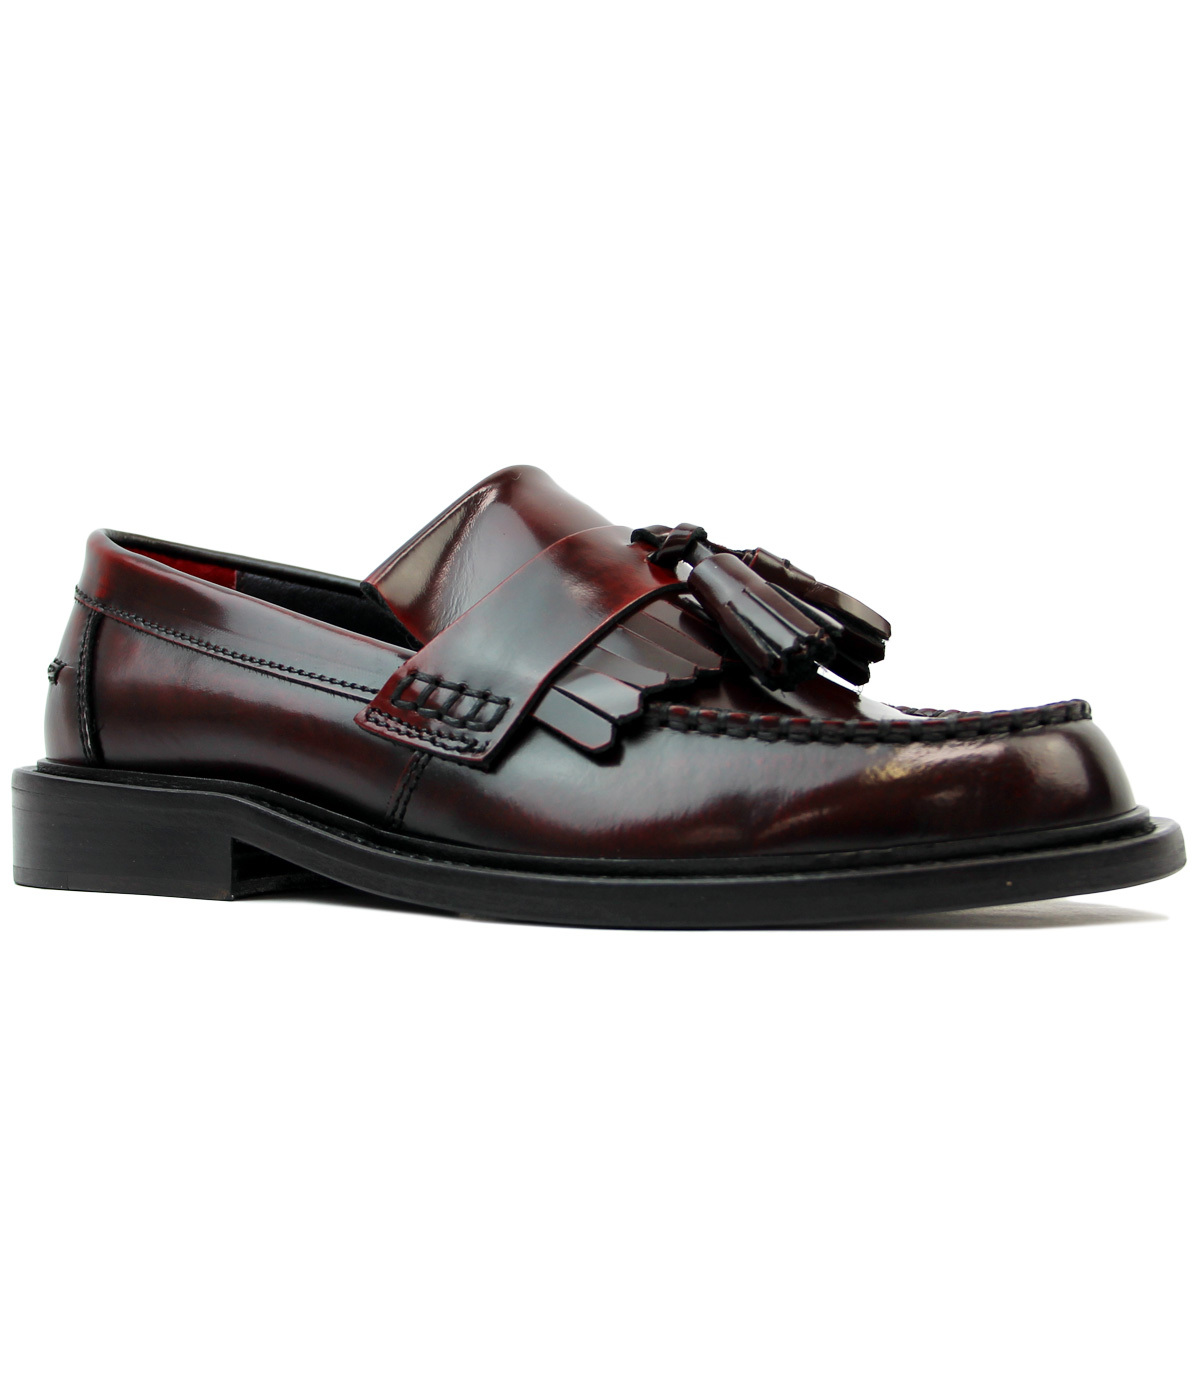 oxblood penny loafers womens